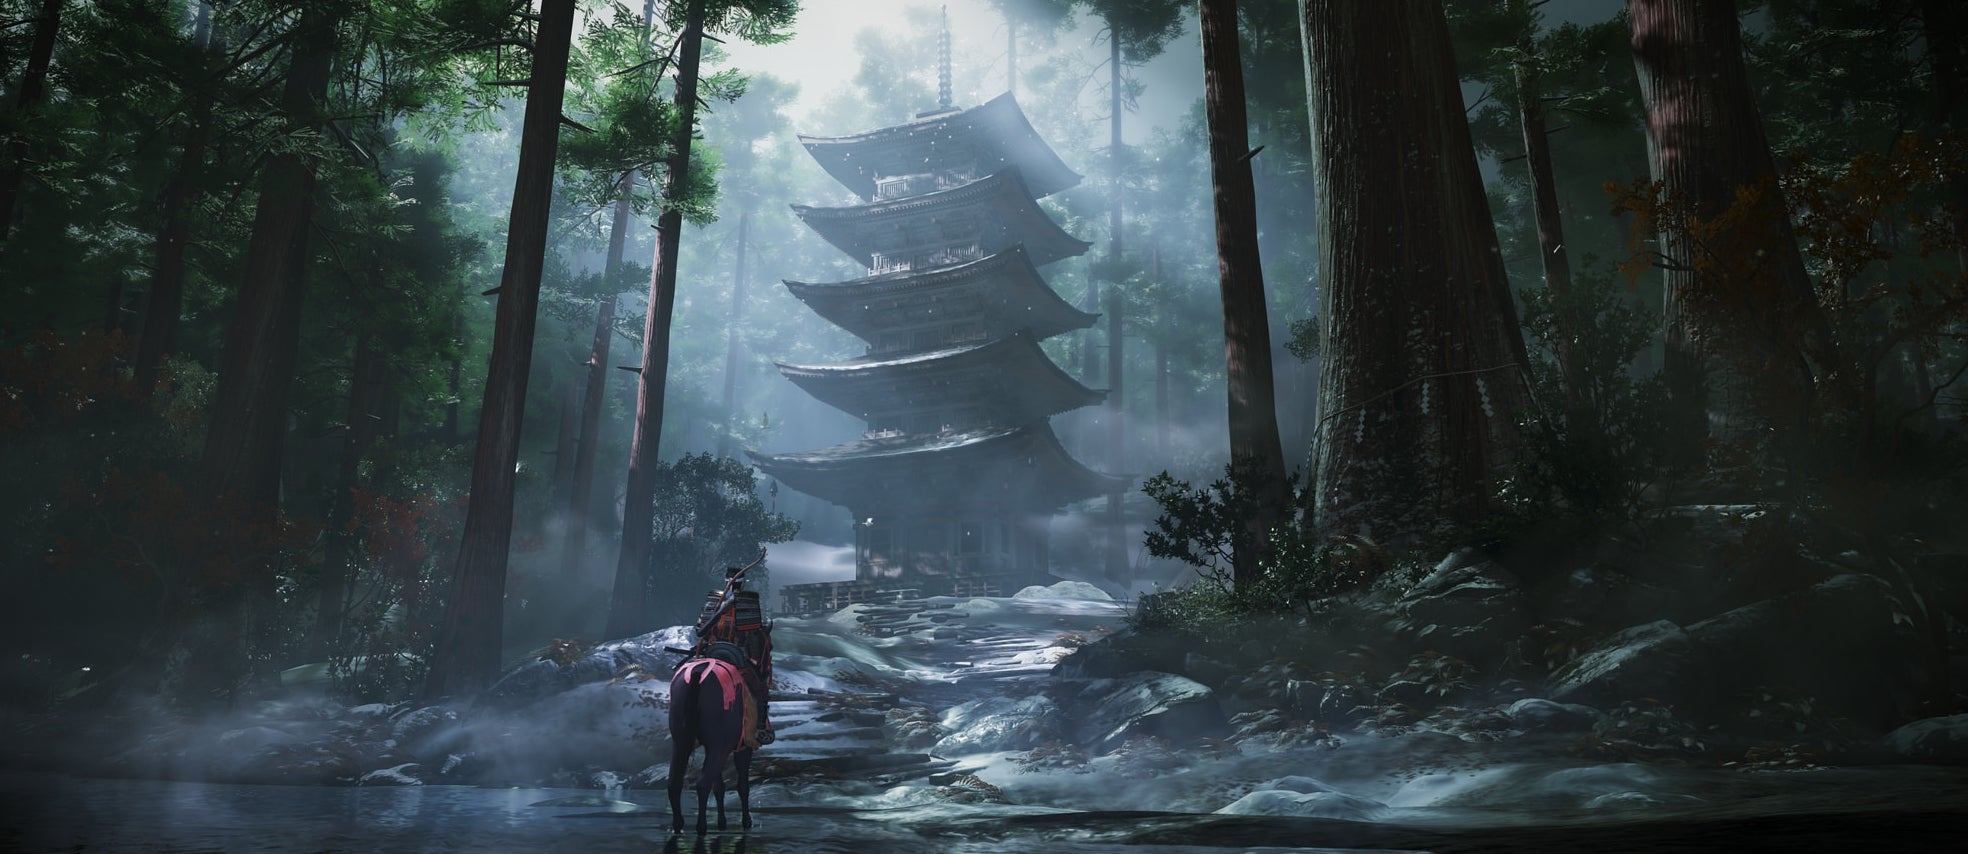 Image for We'll learn more about Ghost of Tsushima and Media Molecule's Dreams at PSX in December